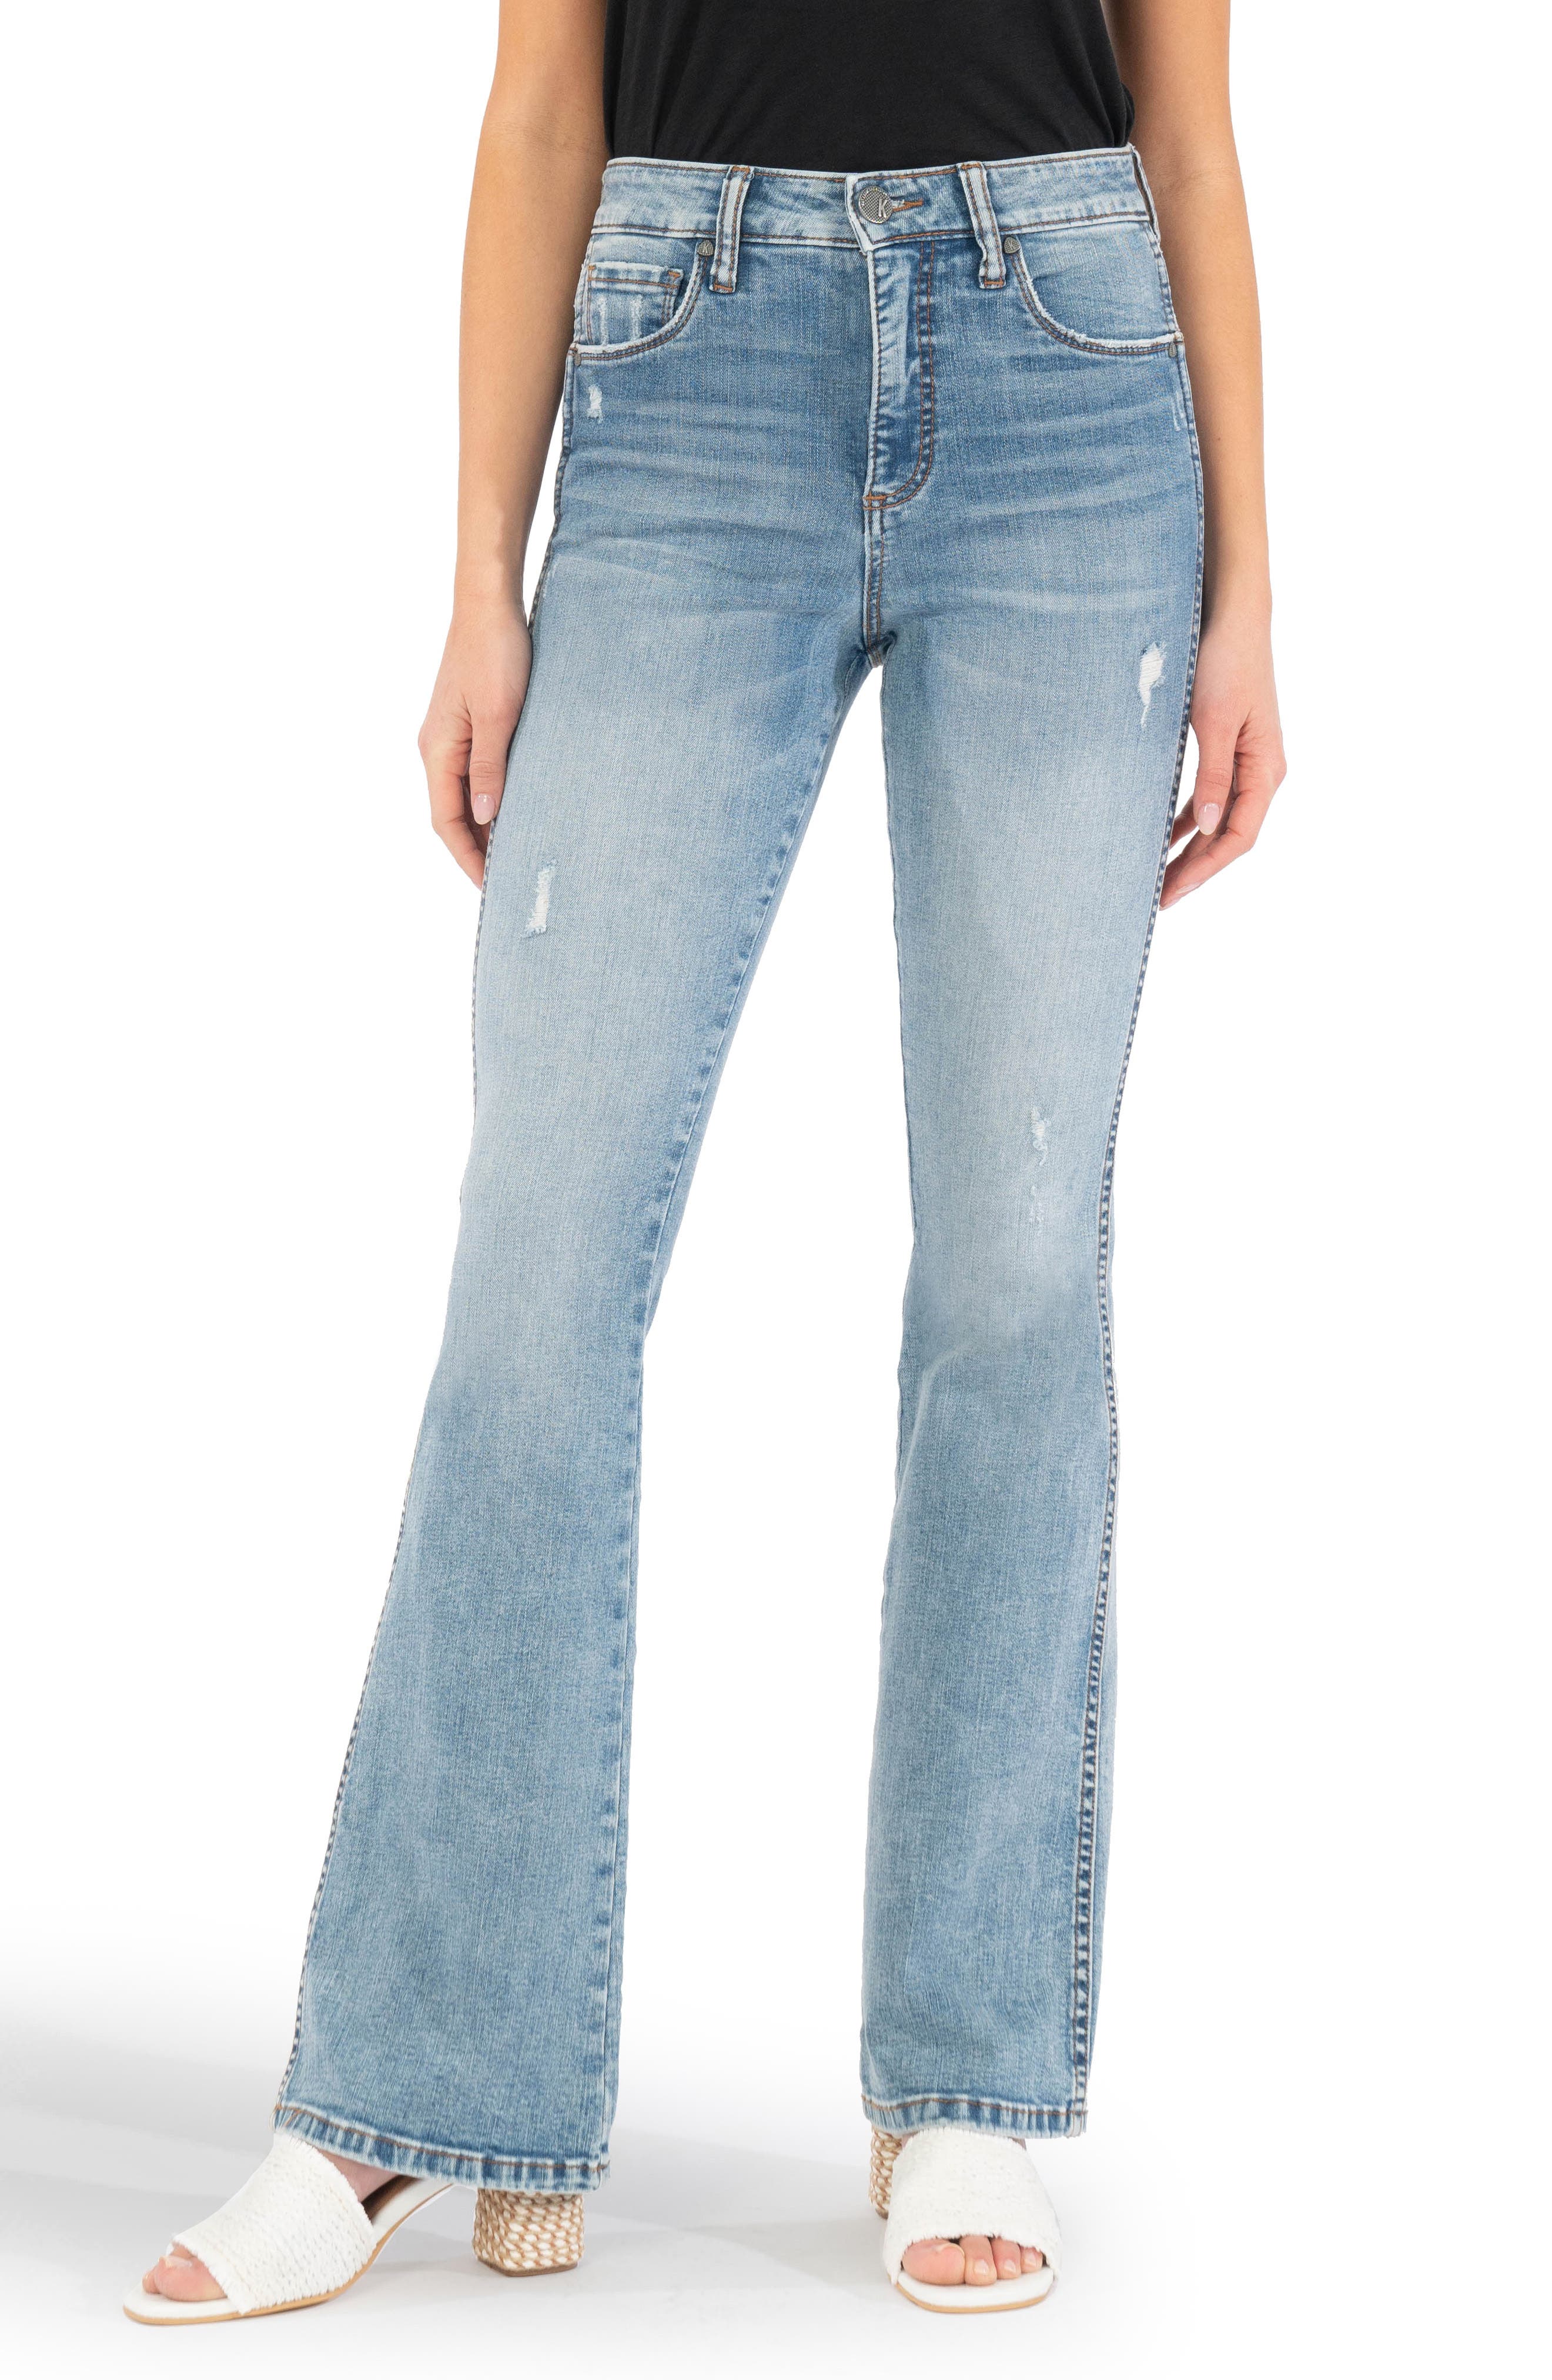 KUT from the Kloth Ana Fab Ab High Waist Flare Jeans in Trusting